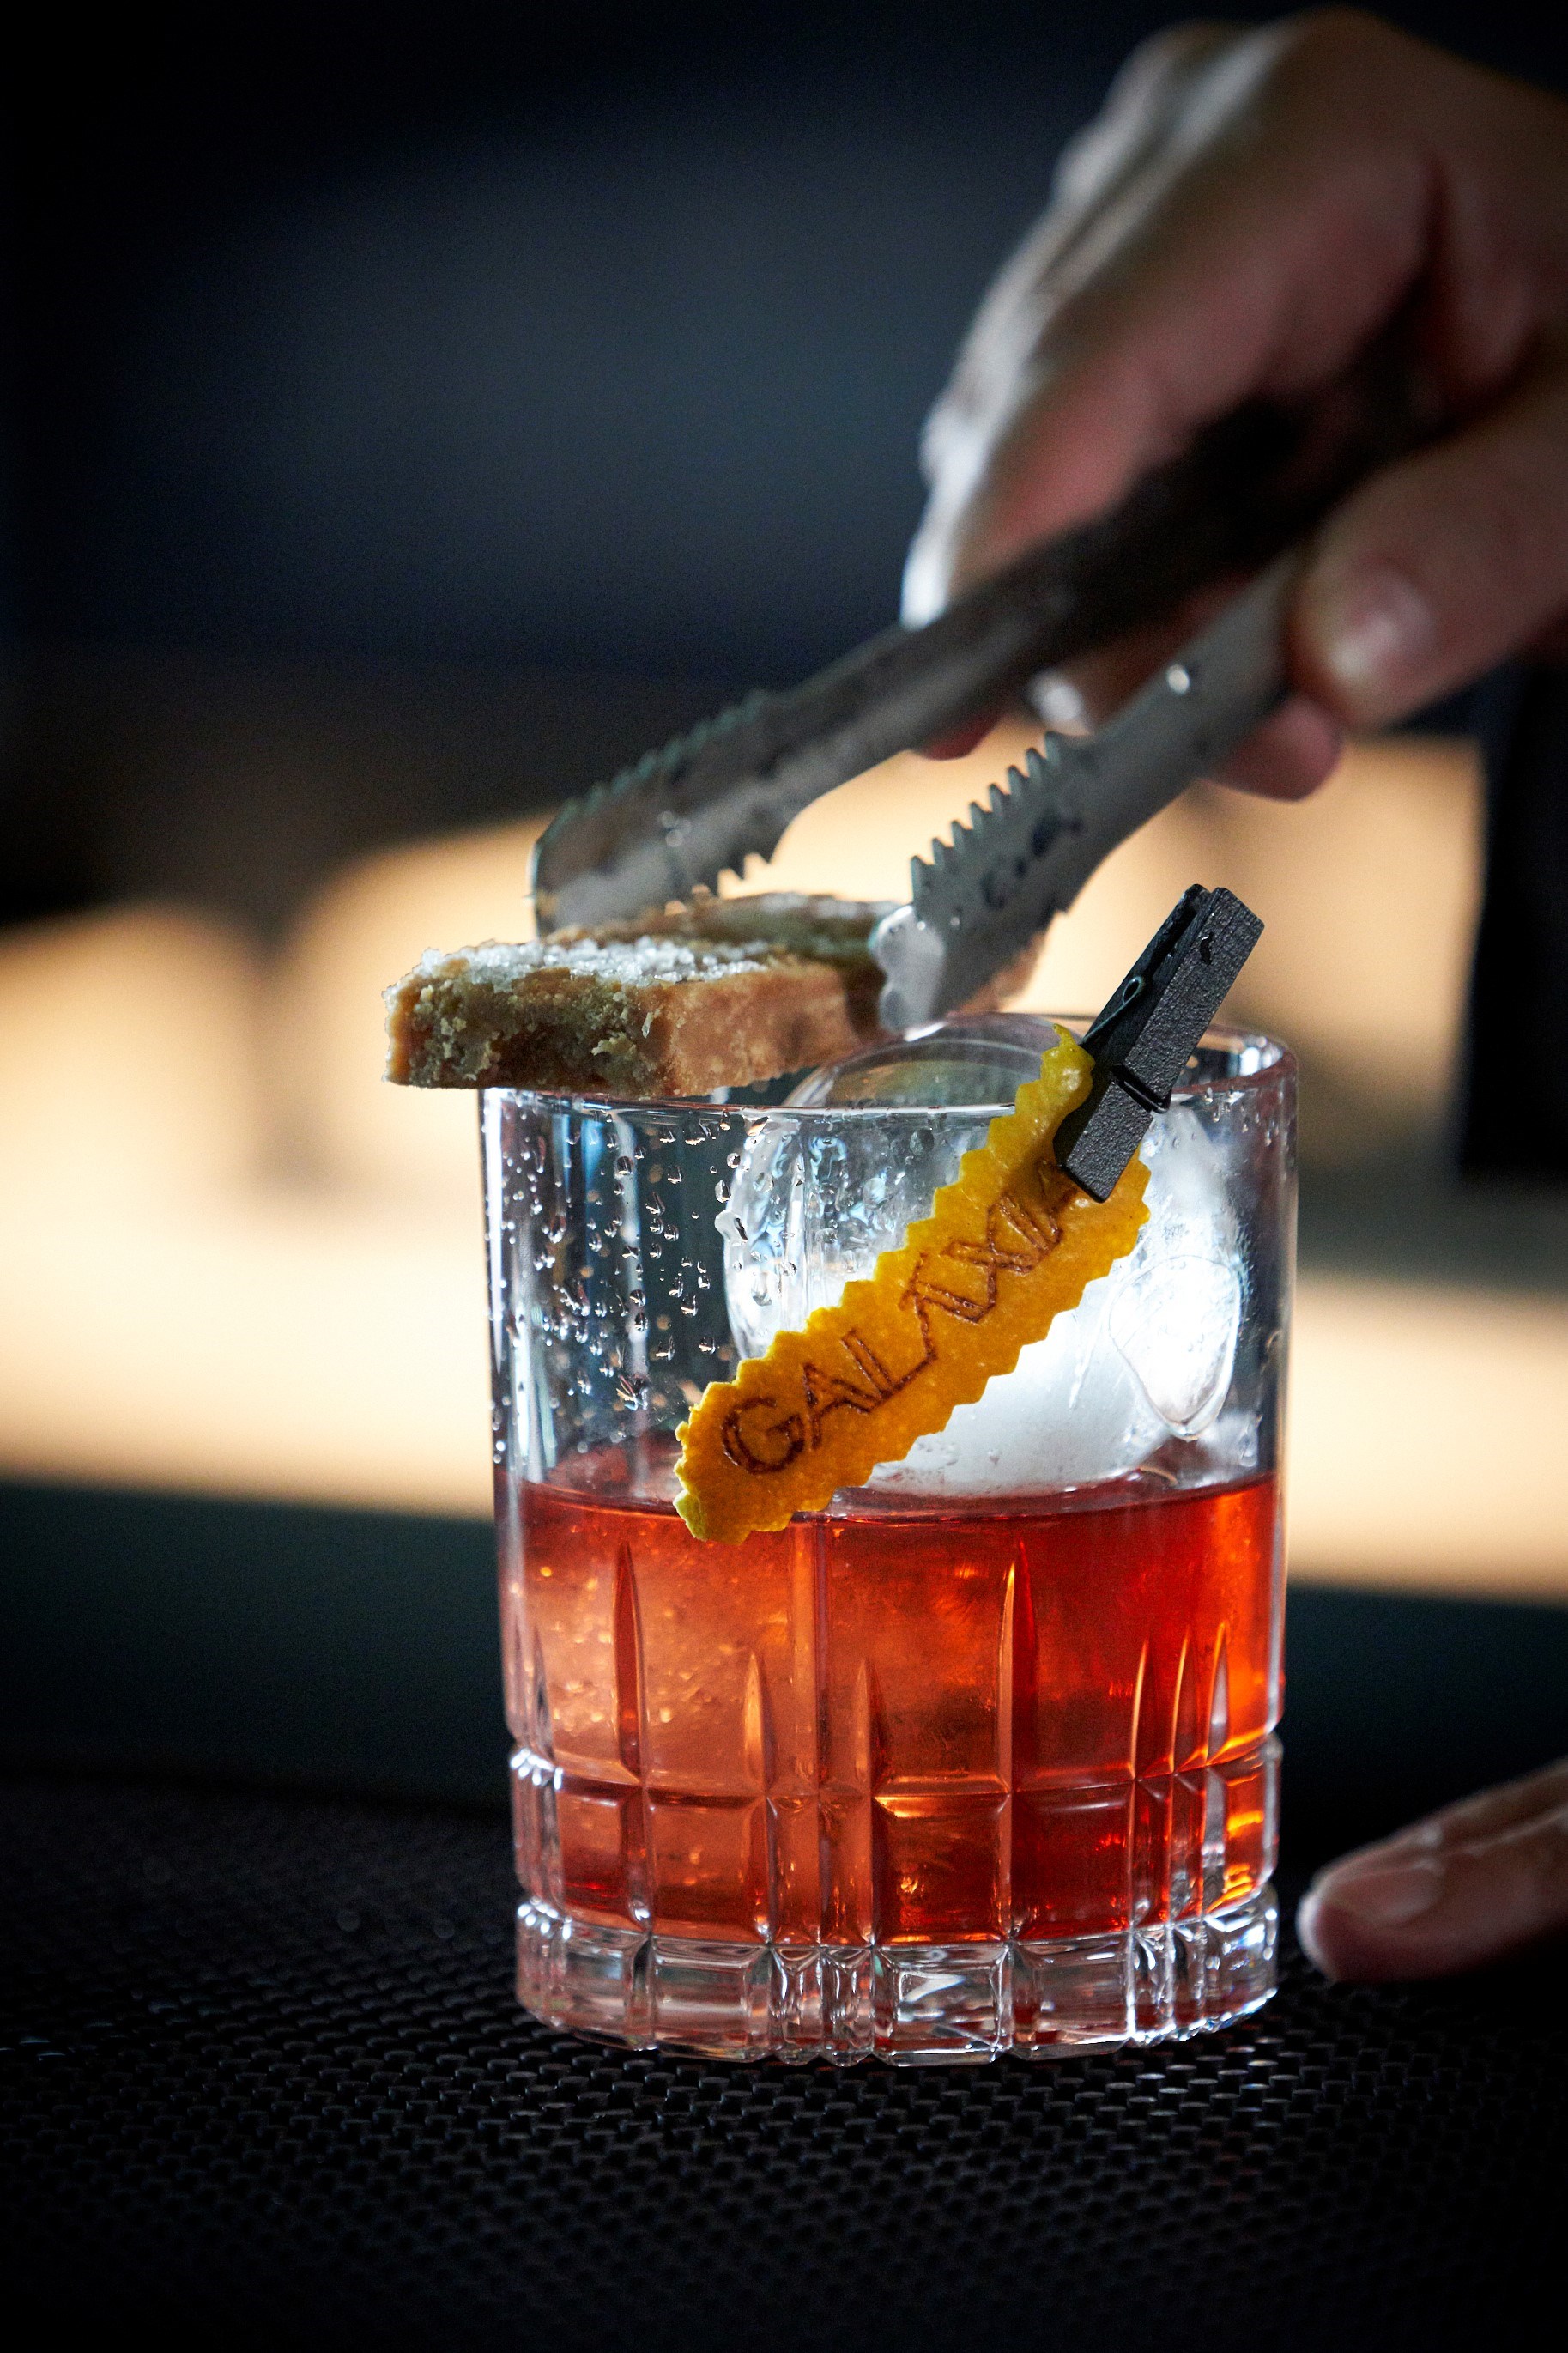 A local take on classic Negroni